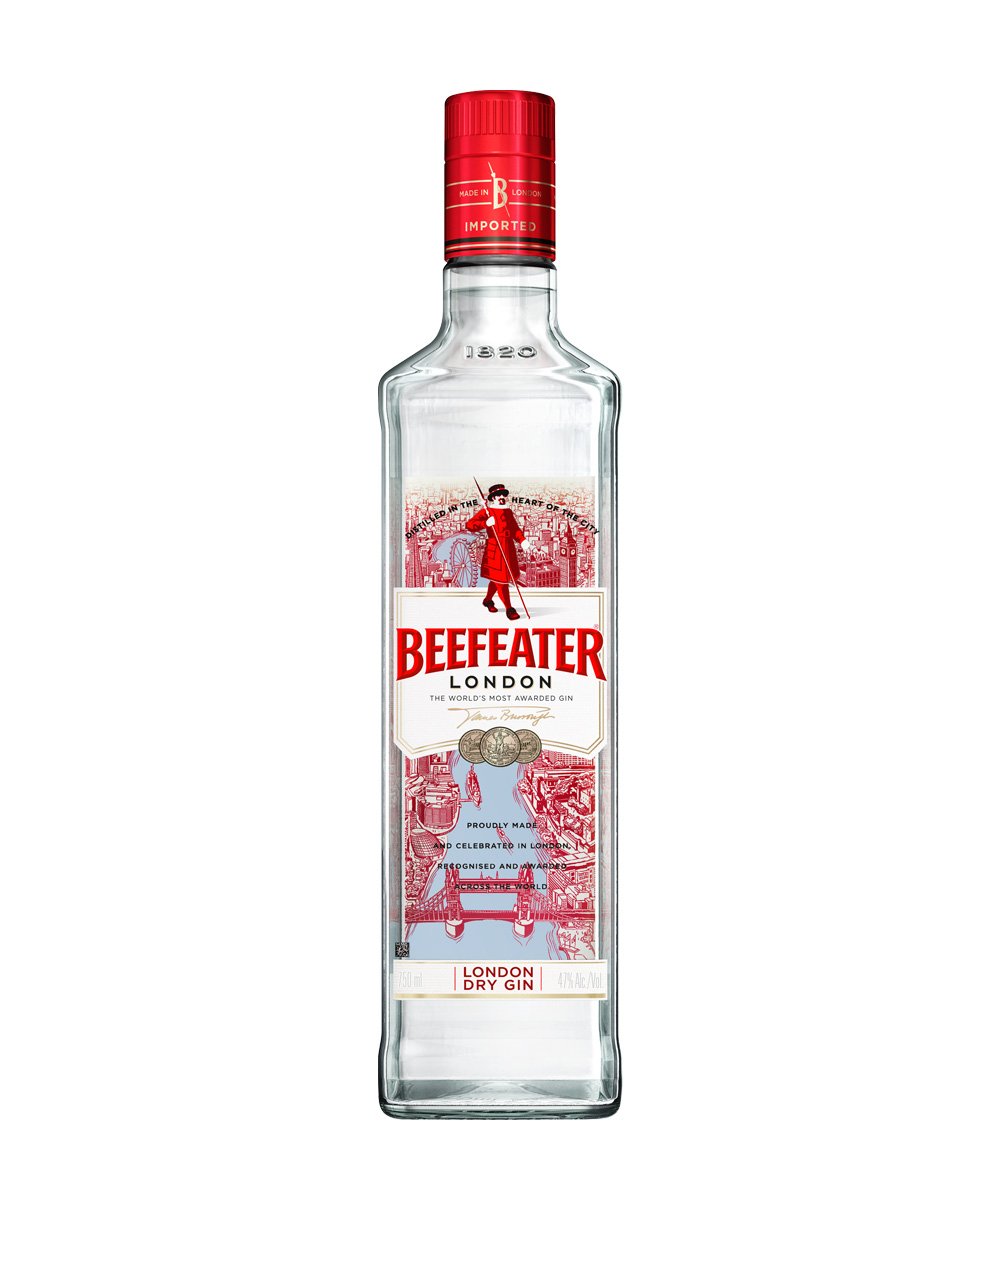 Beefeater London Dry Gin bottle